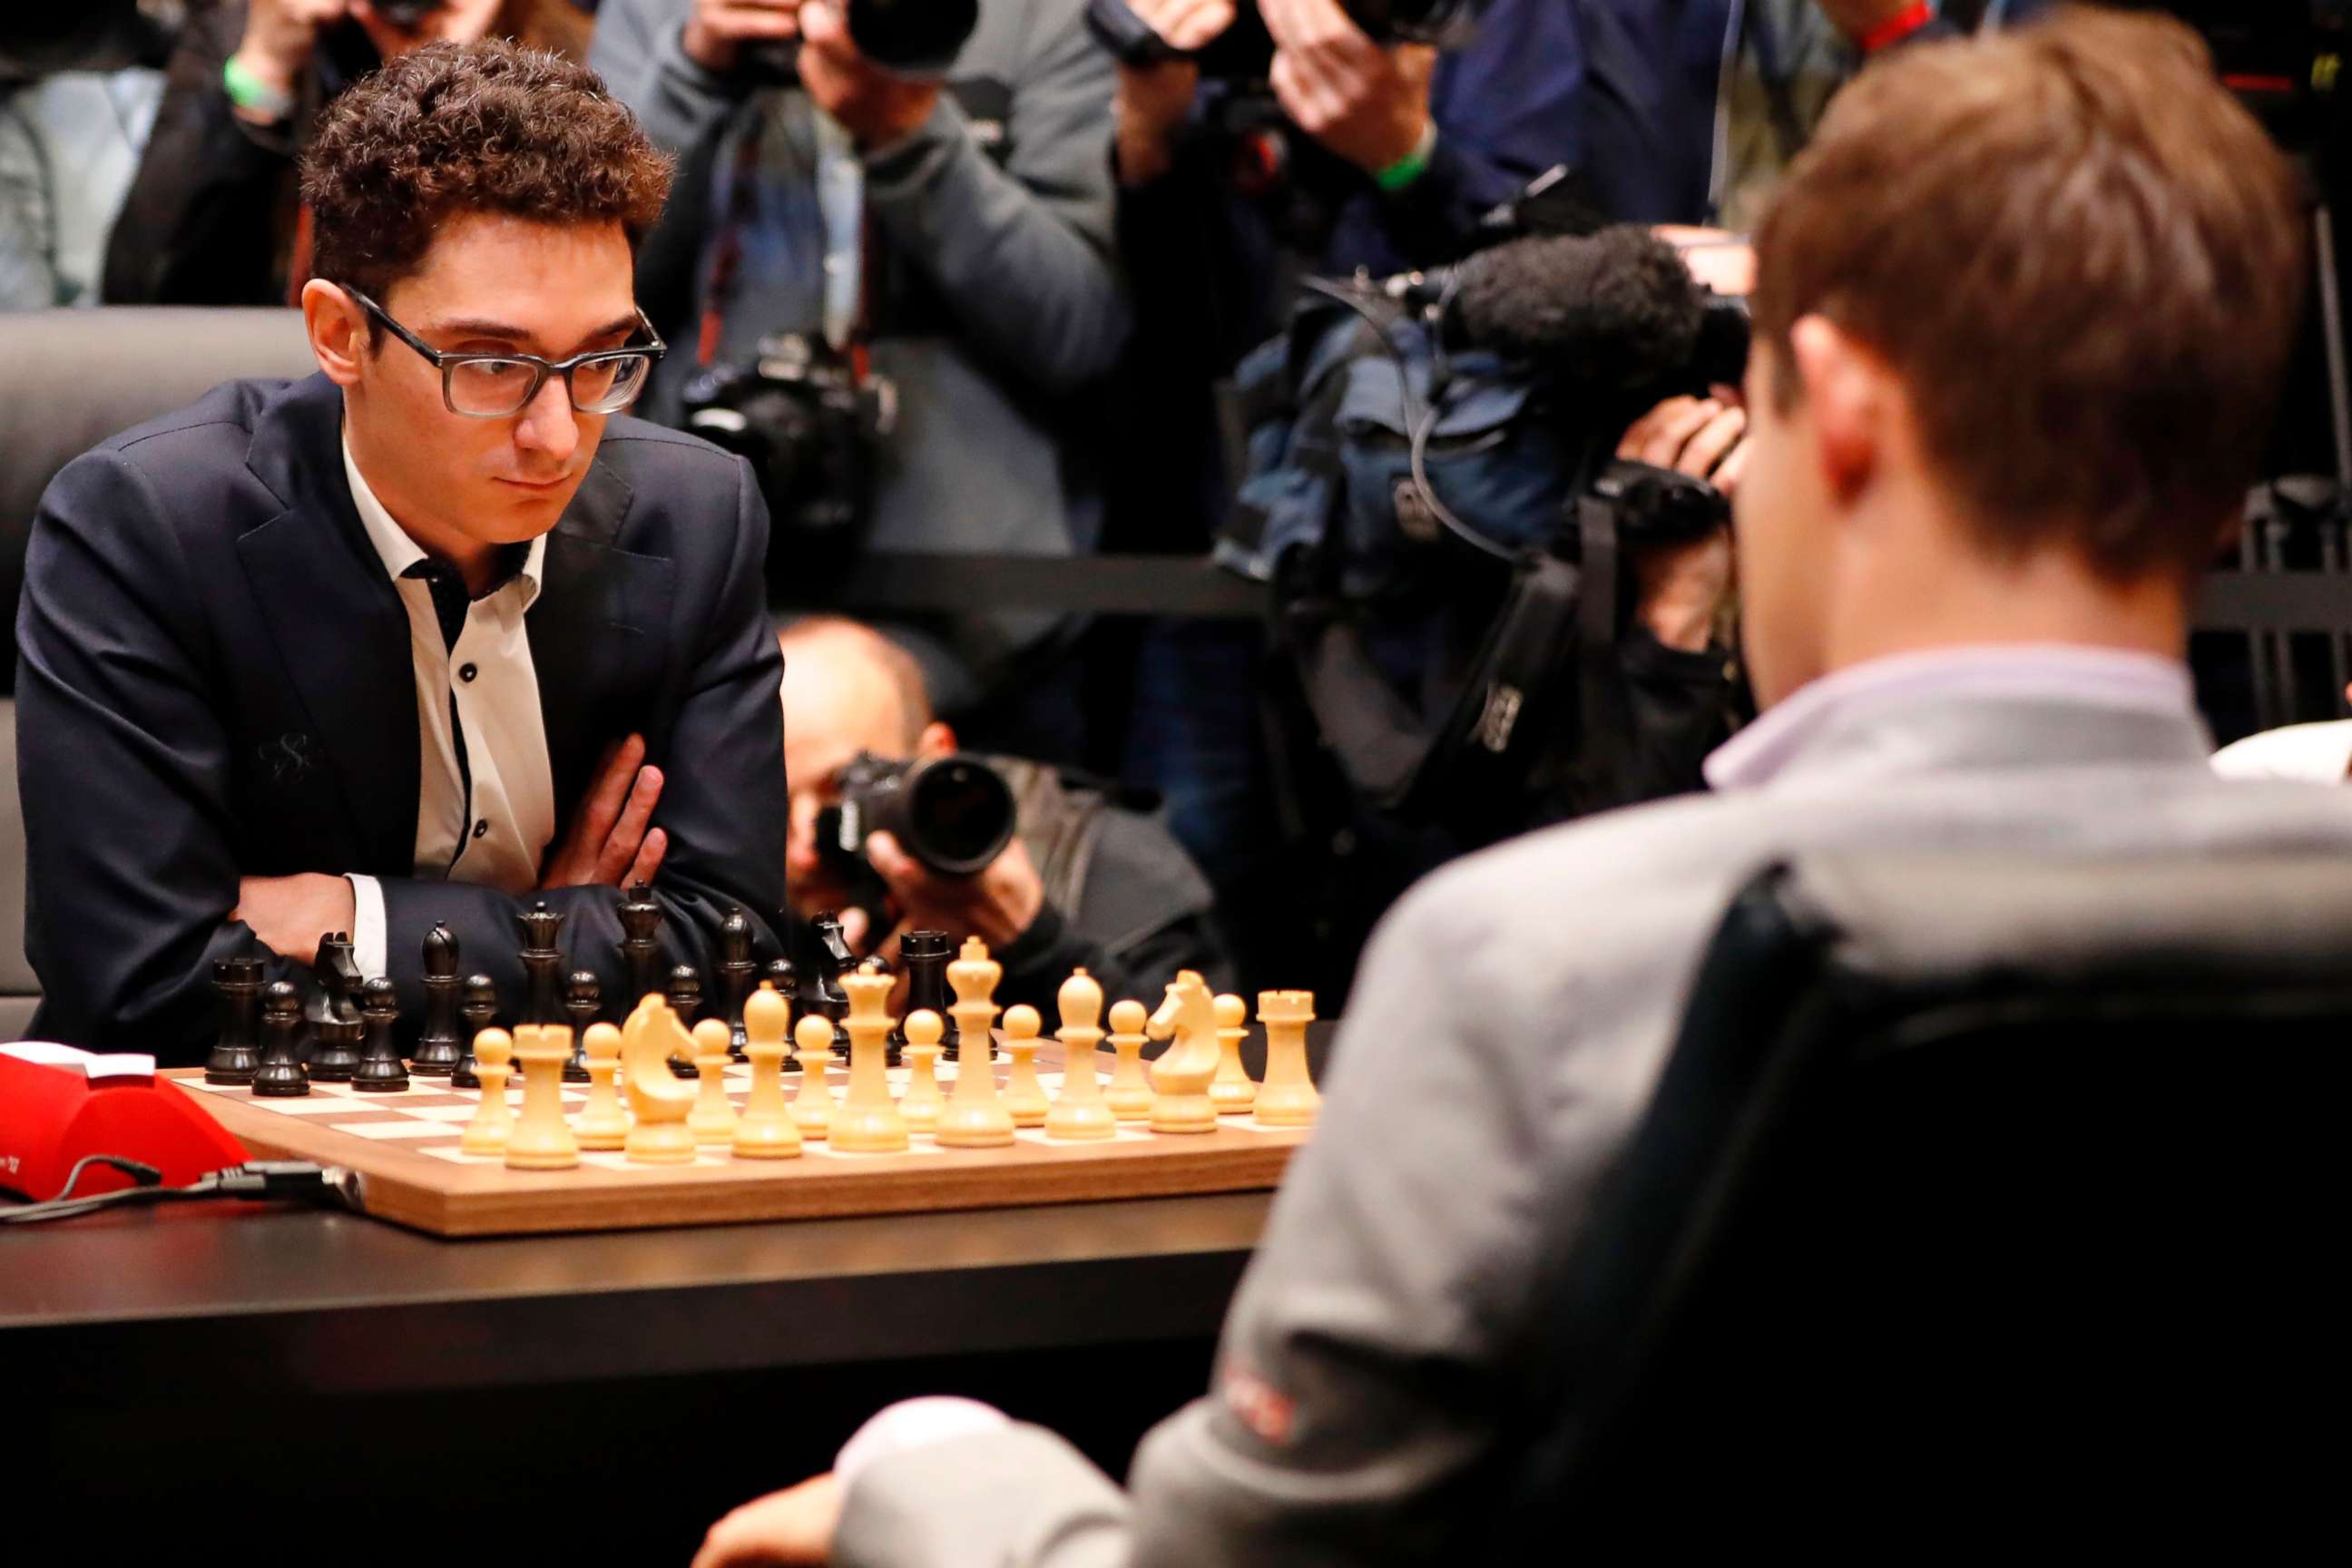 World Chess Championship: the first game ended in a draw after 45 moves